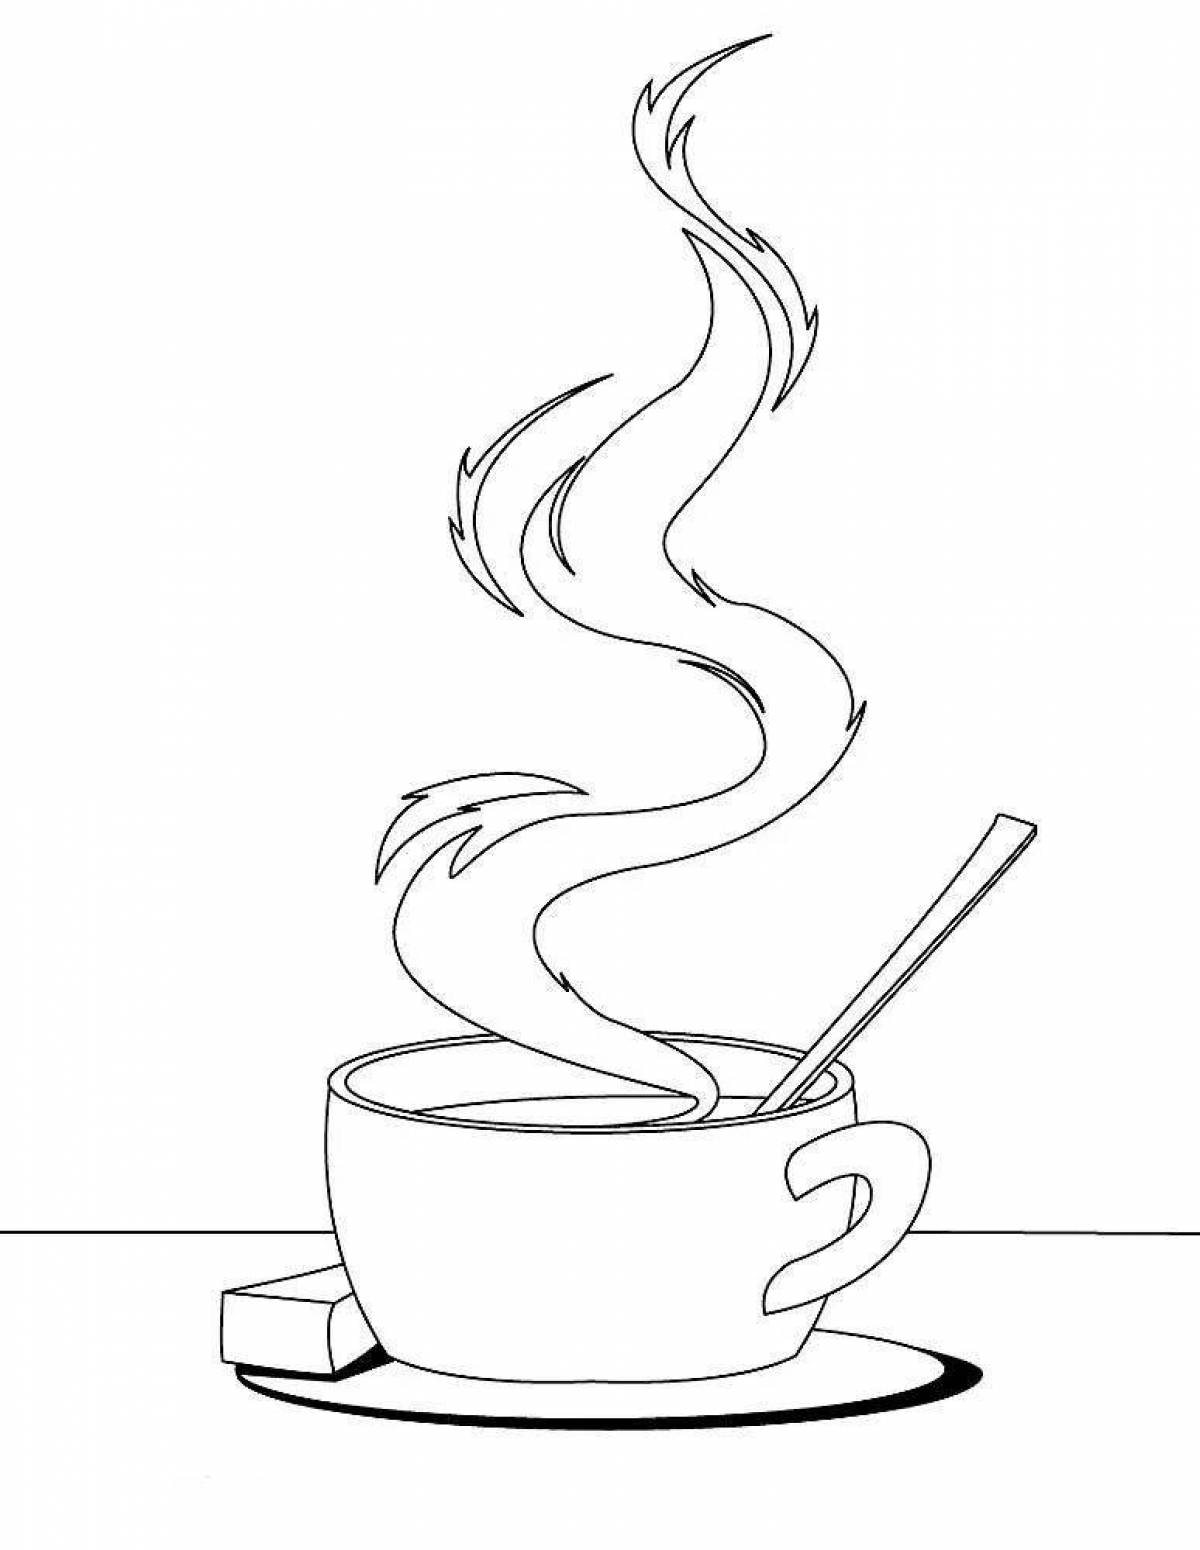 Exciting tea coloring book for kids